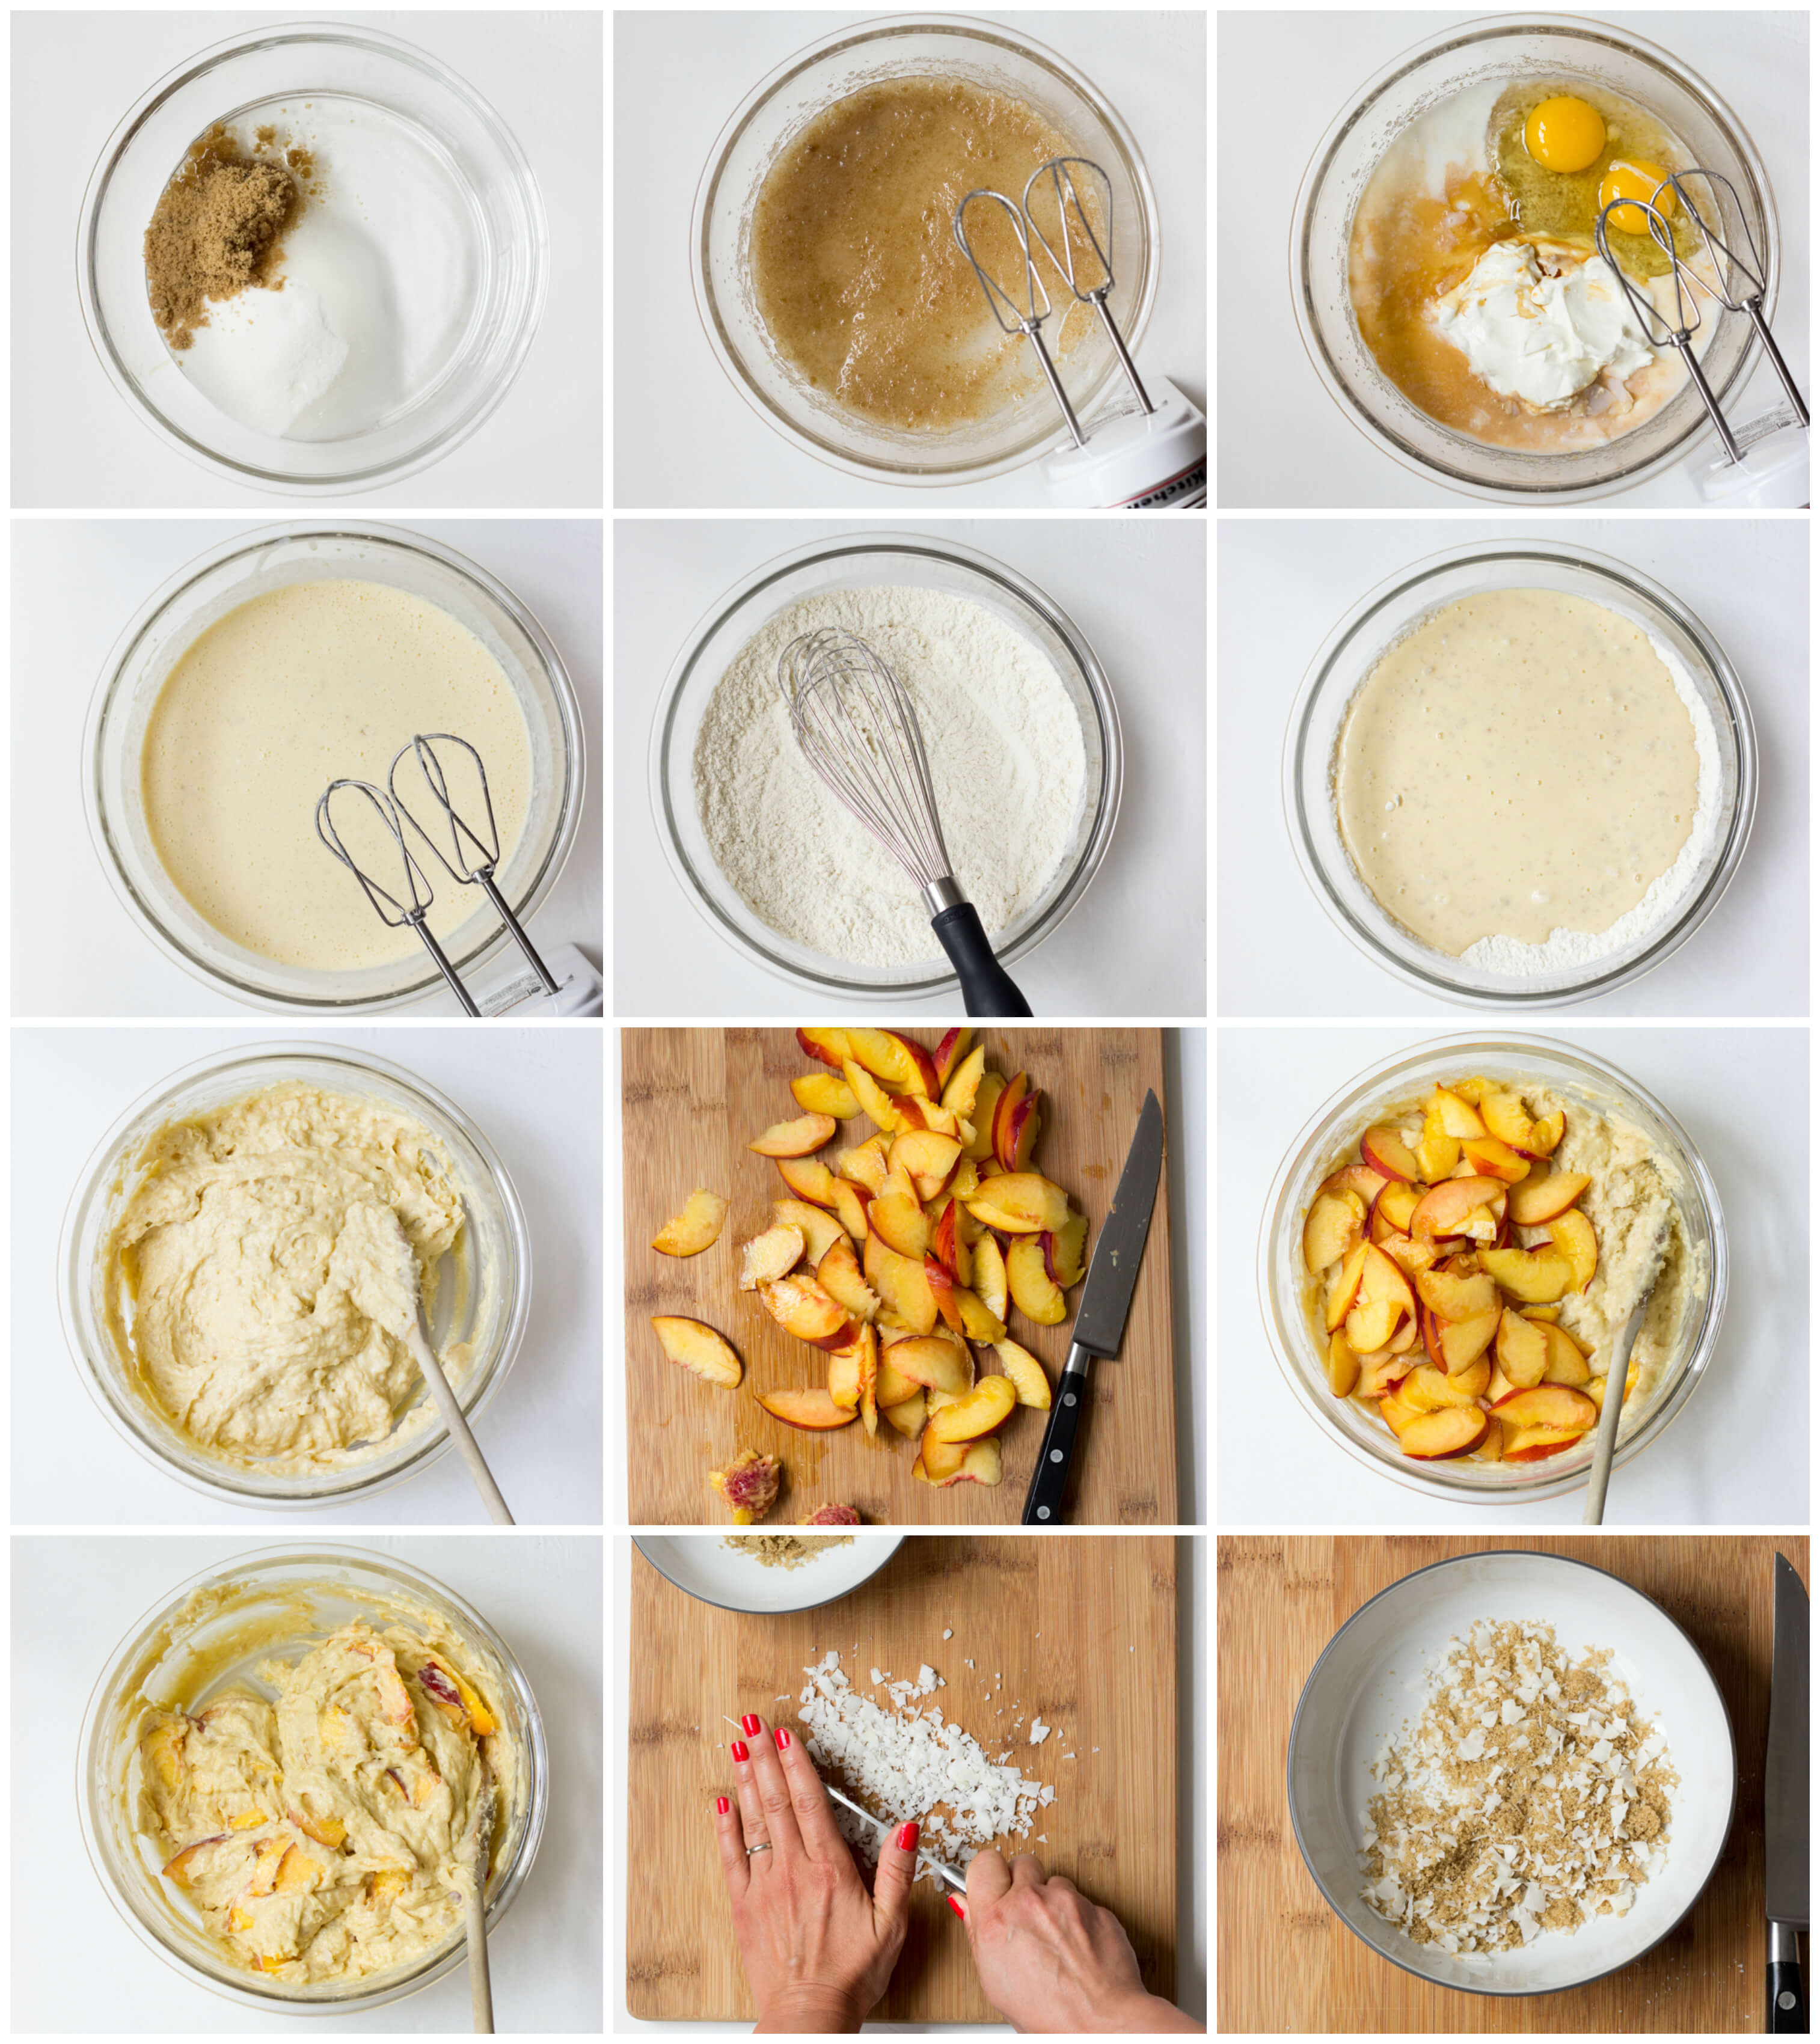 step by step instructions on how to make peach muffins with coconut